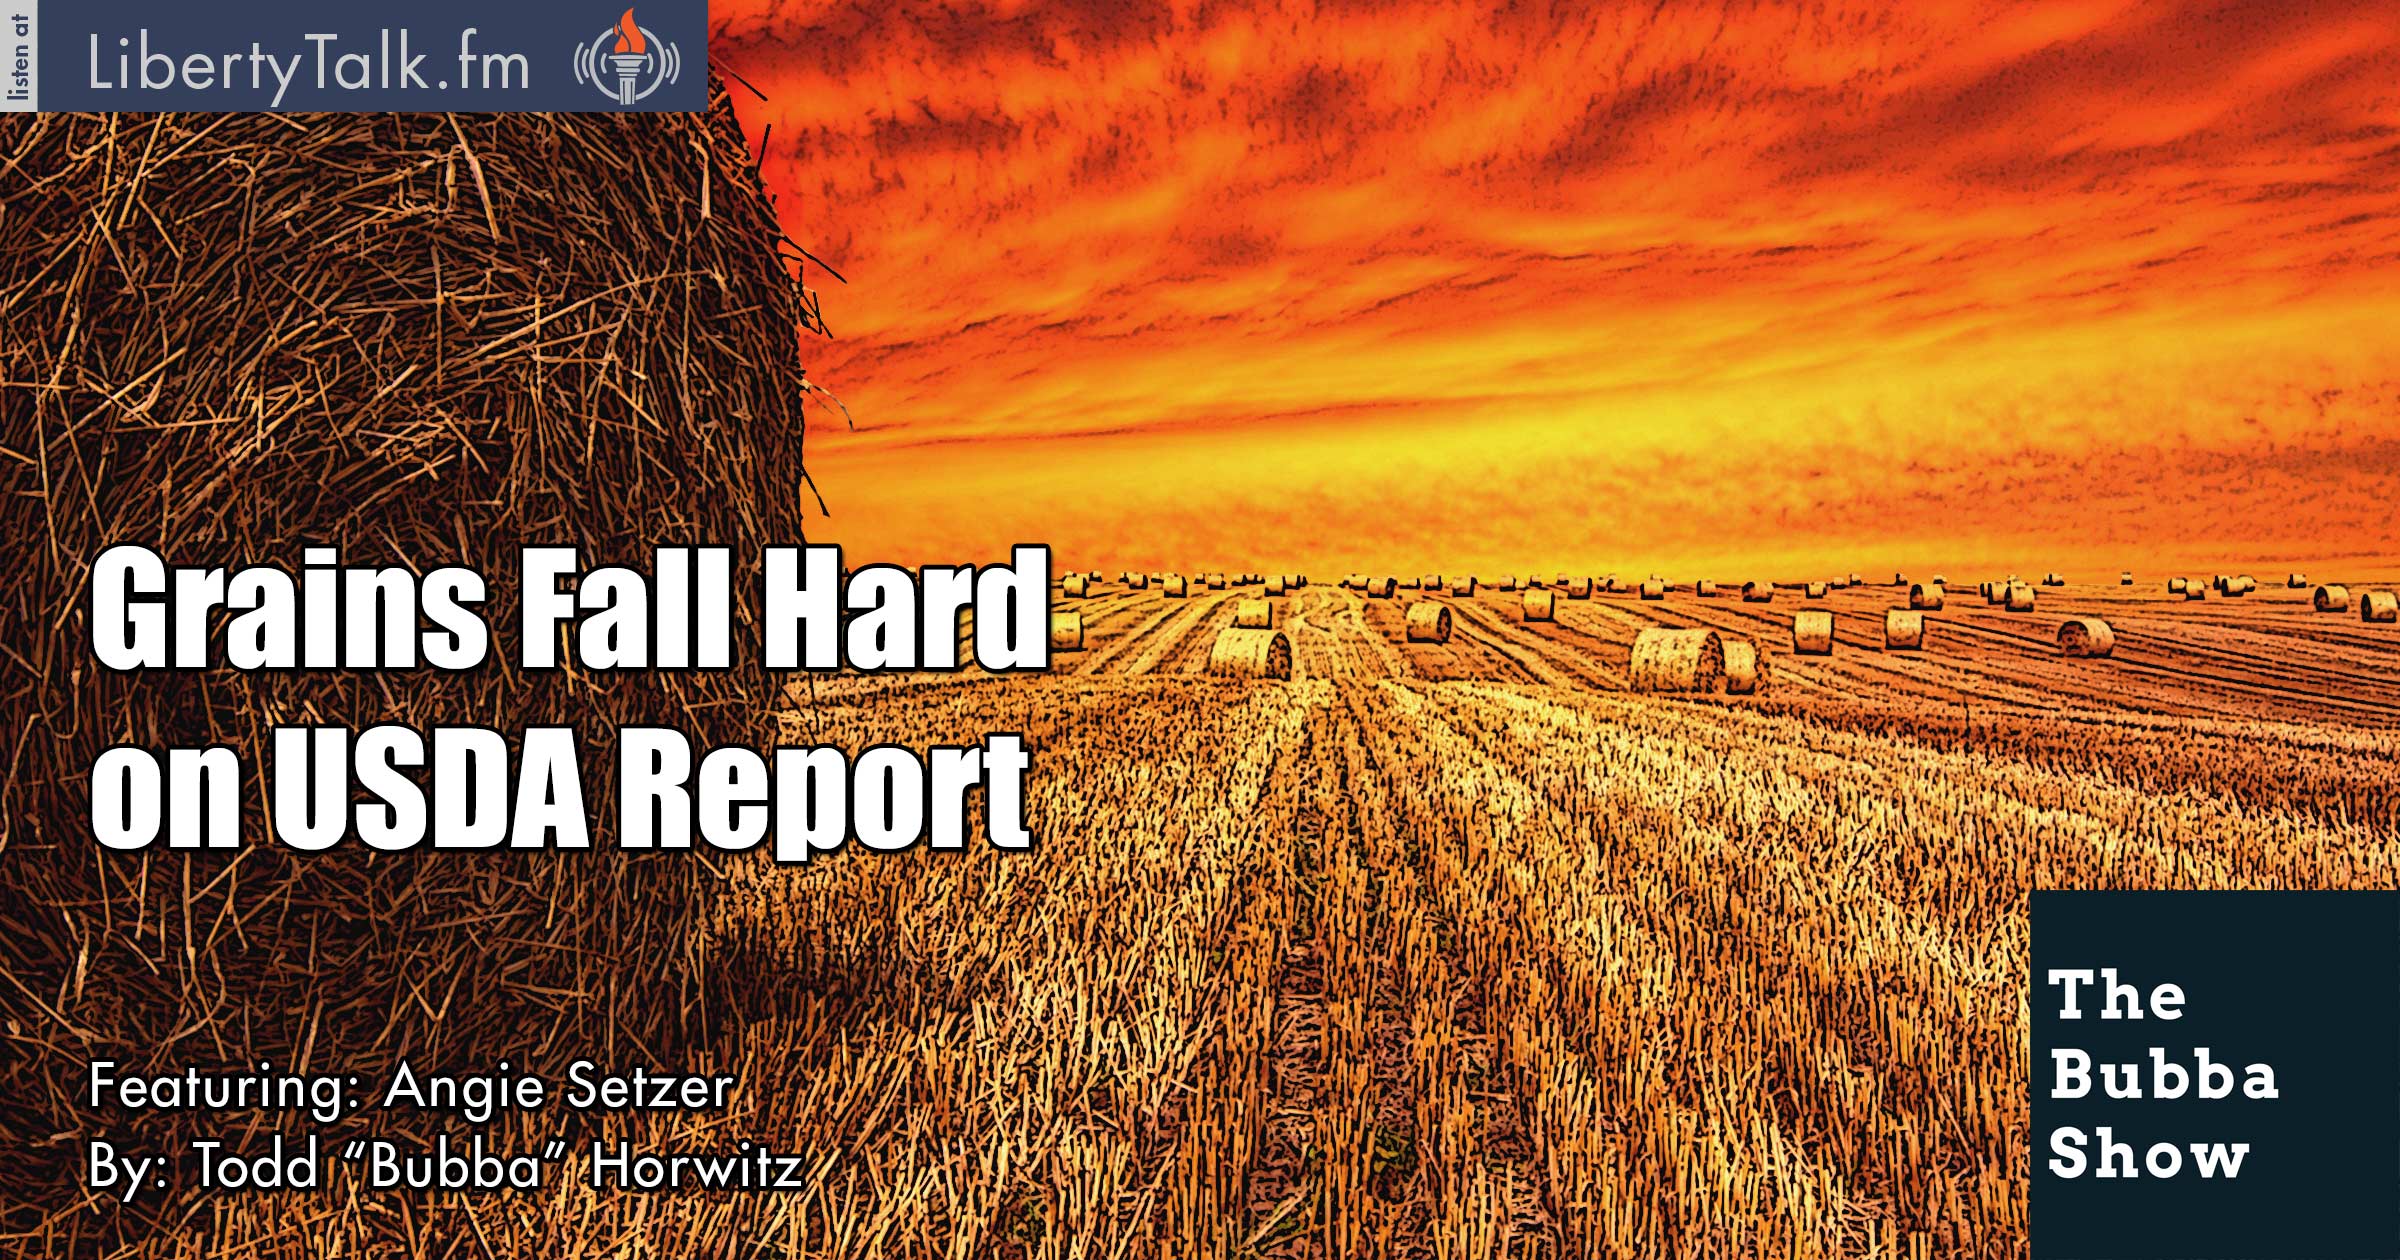 Grains Fall Hard on USDA Report - The Bubba Show